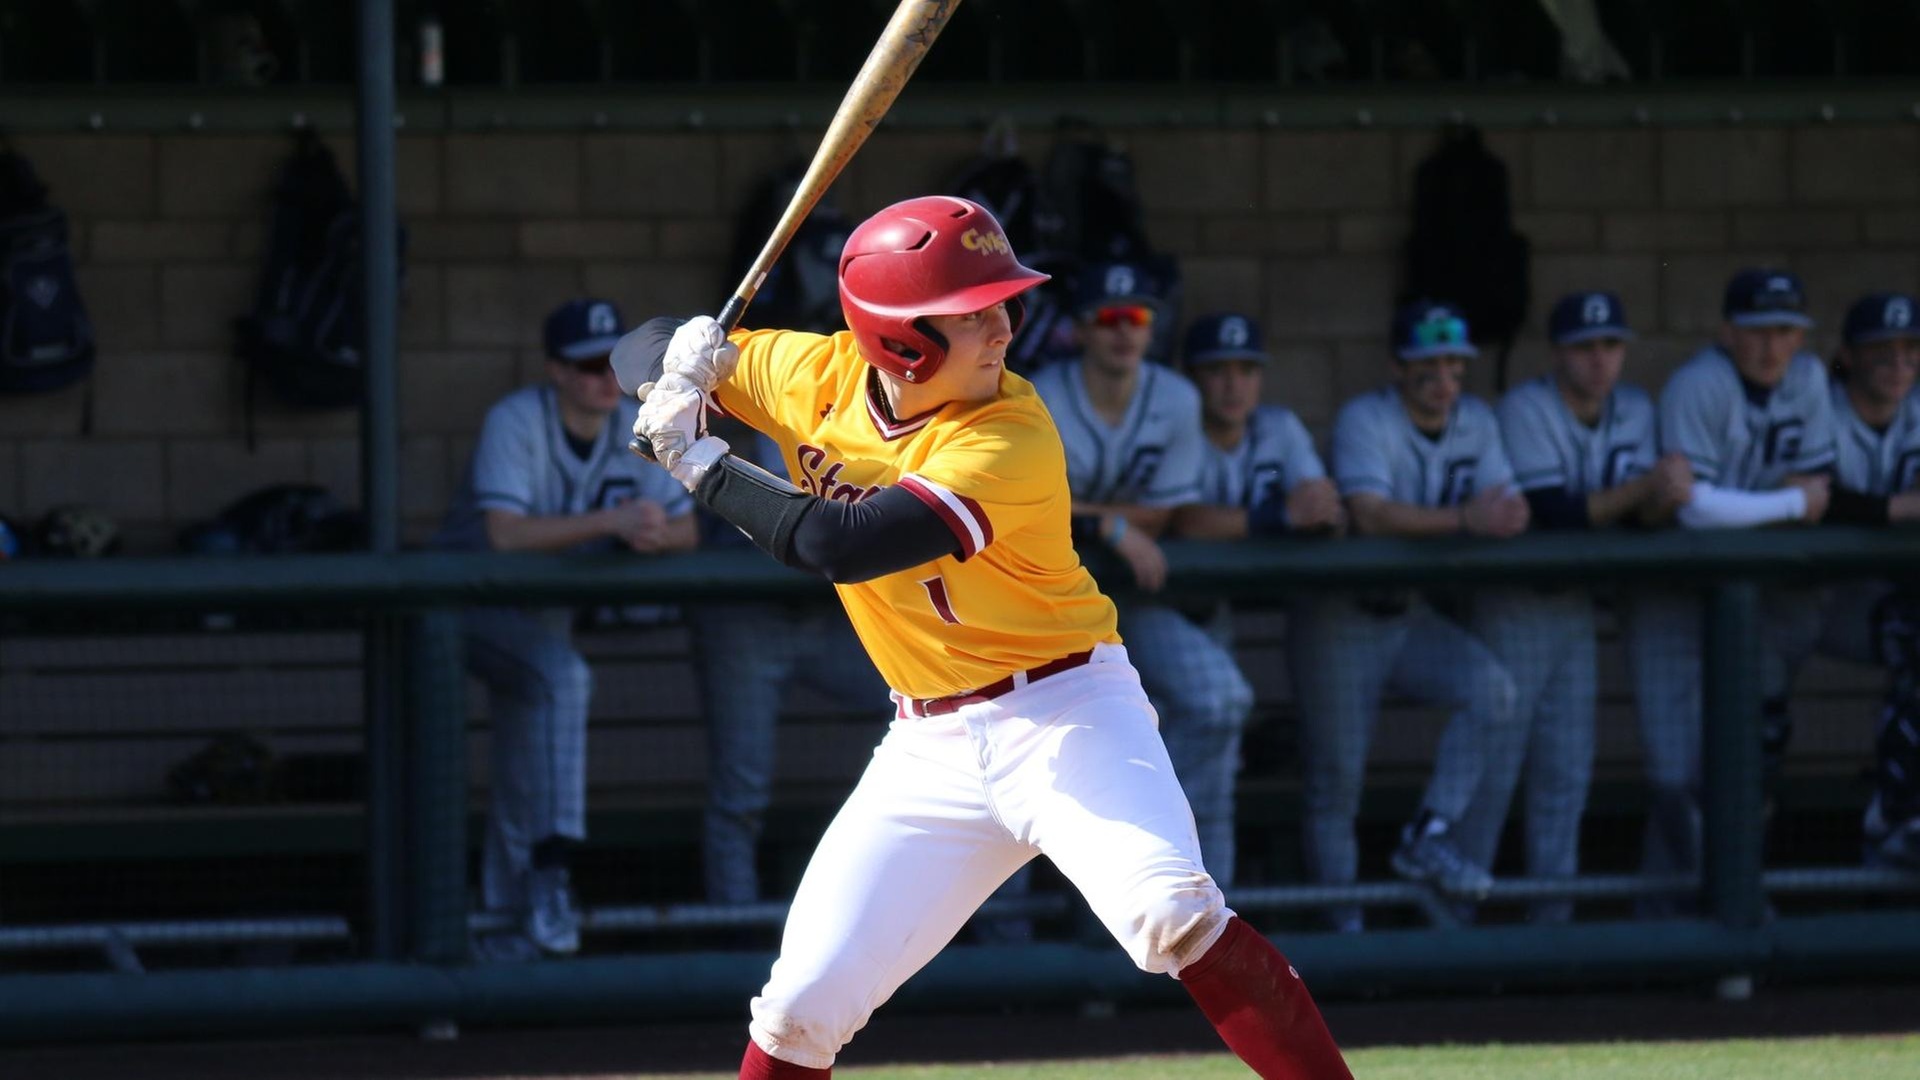 William DeForest was 4-for-4 for the Stags with three RBI